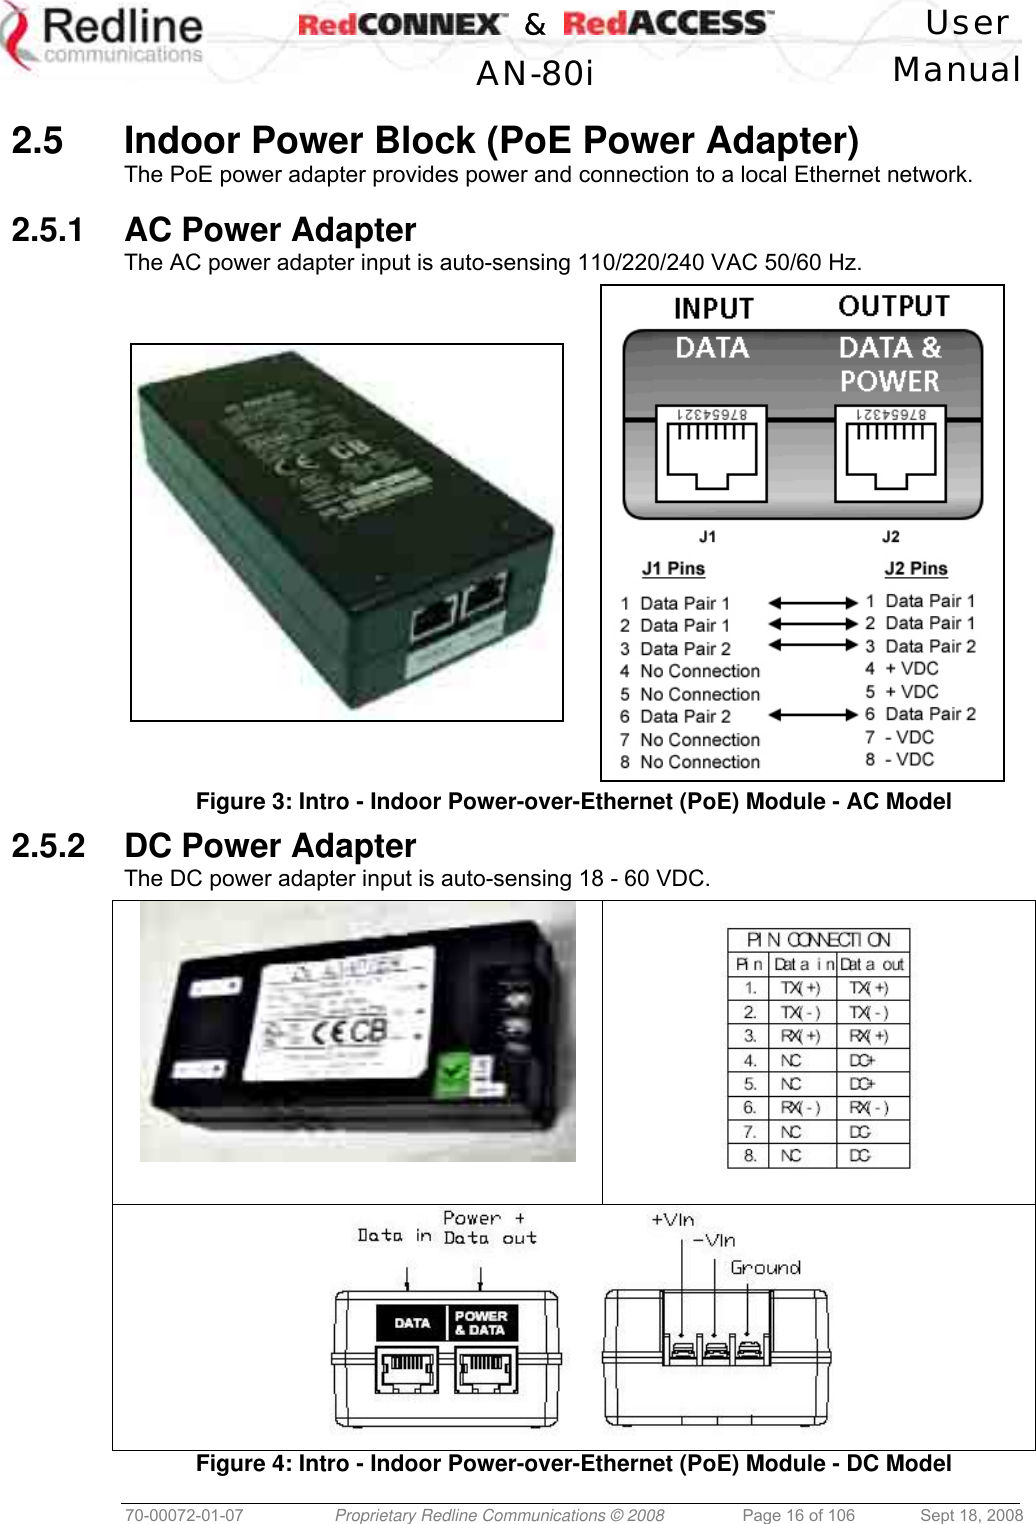    &amp;  User  AN-80i Manual  70-00072-01-07  Proprietary Redline Communications © 2008  Page 16 of 106  Sept 18, 2008  2.5  Indoor Power Block (PoE Power Adapter) The PoE power adapter provides power and connection to a local Ethernet network.  2.5.1  AC Power Adapter The AC power adapter input is auto-sensing 110/220/240 VAC 50/60 Hz.  Figure 3: Intro - Indoor Power-over-Ethernet (PoE) Module - AC Model 2.5.2  DC Power Adapter The DC power adapter input is auto-sensing 18 - 60 VDC.     Figure 4: Intro - Indoor Power-over-Ethernet (PoE) Module - DC Model 